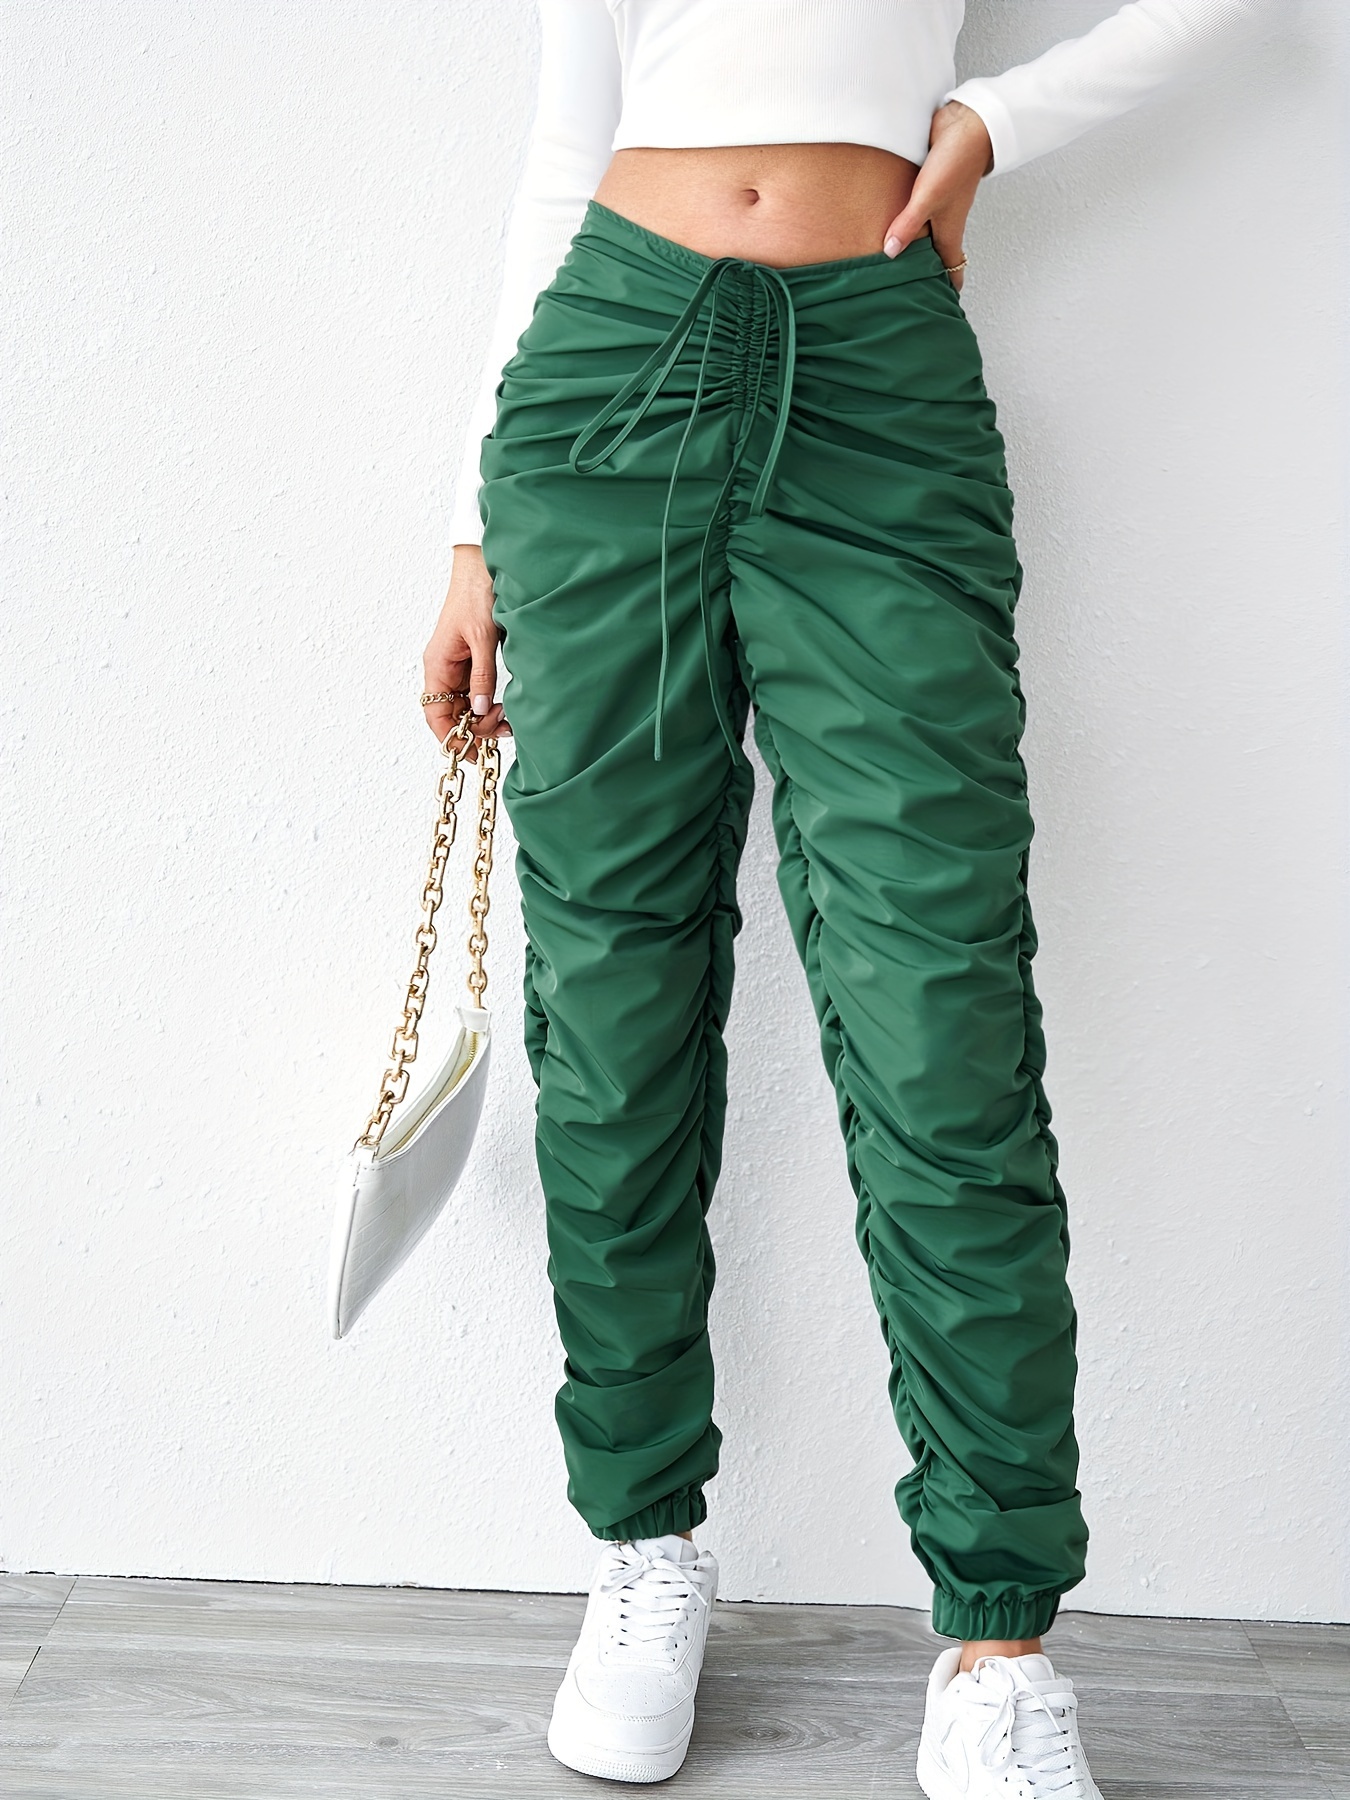 High Waisted Drawstring Cargo Sweatpants Women For Women Solid